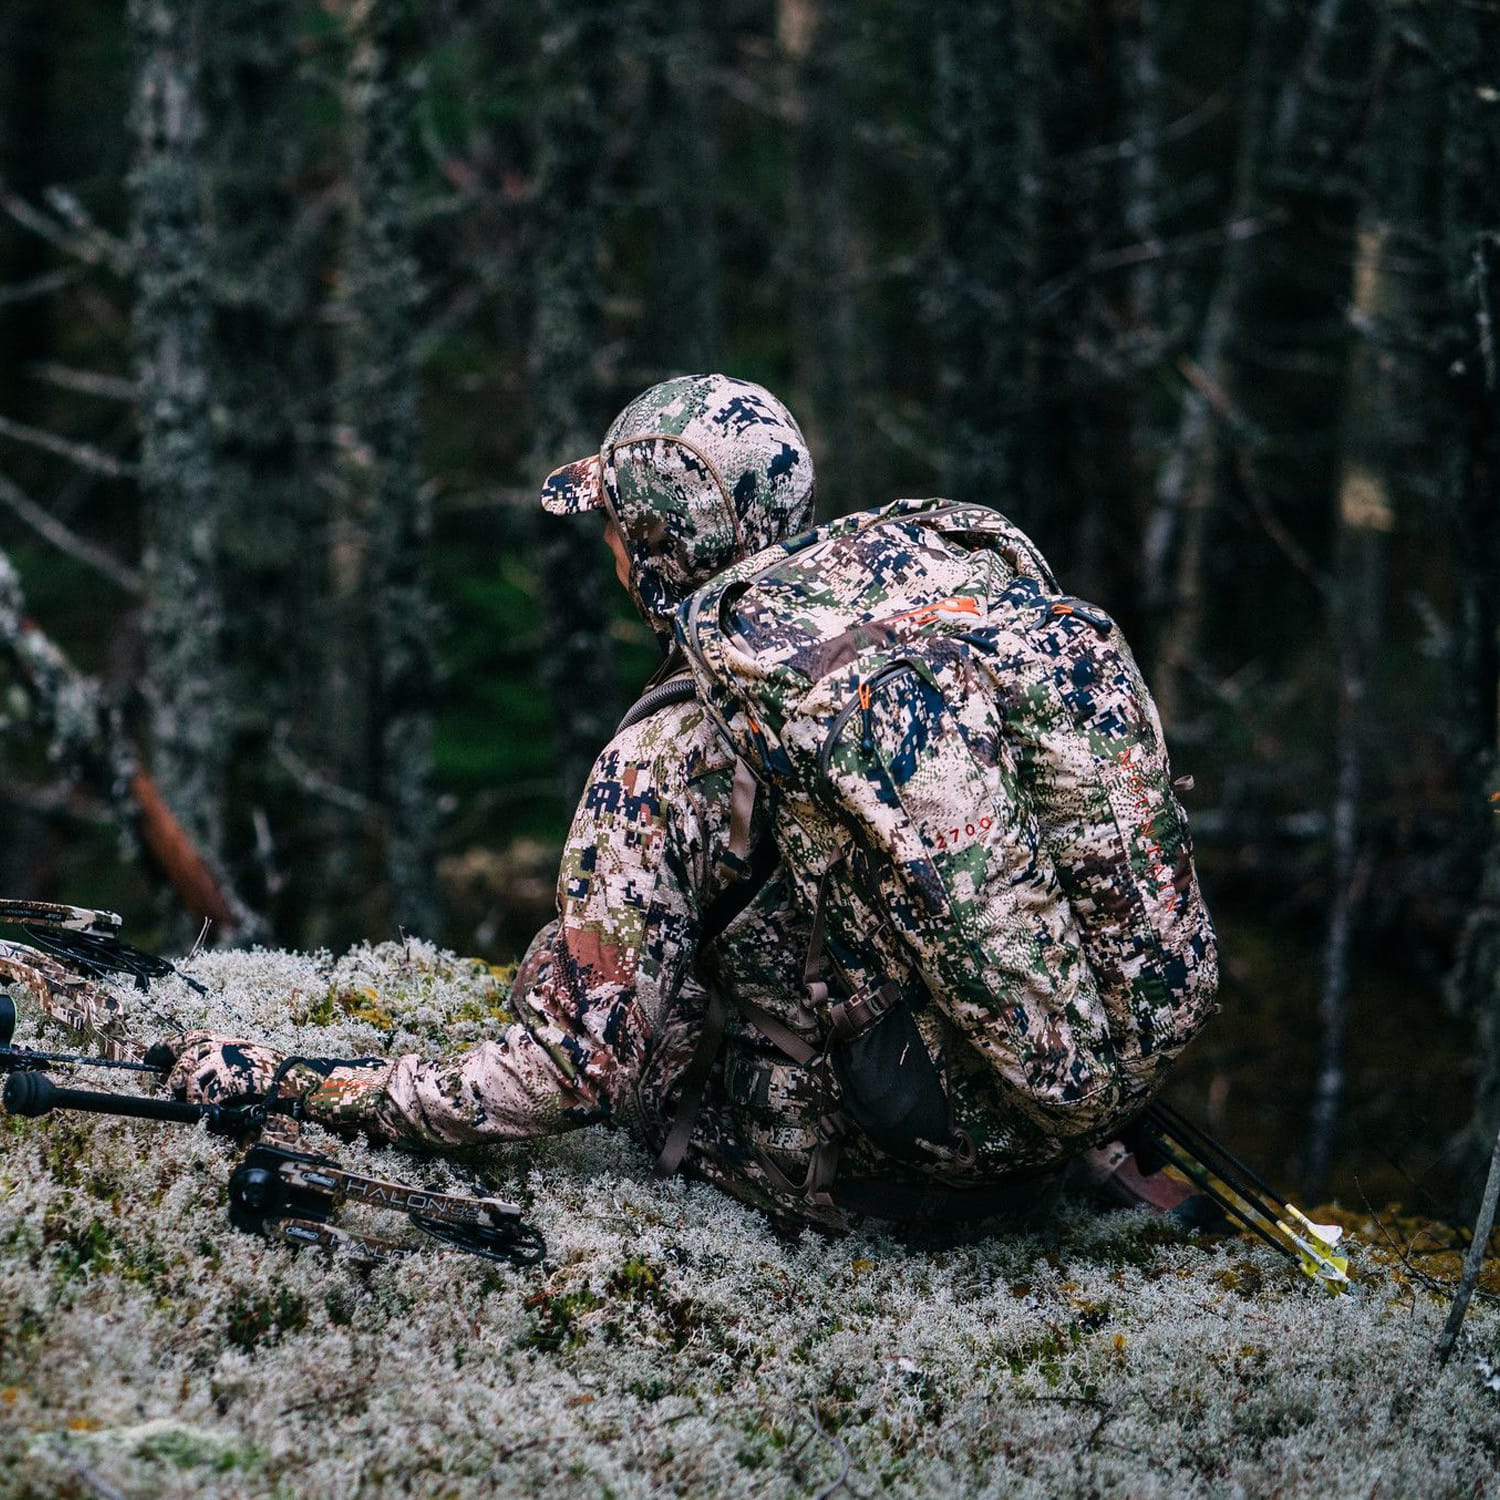 Top Sporting Goods and Outdoor Gear Brands | Sportsman's Warehouse